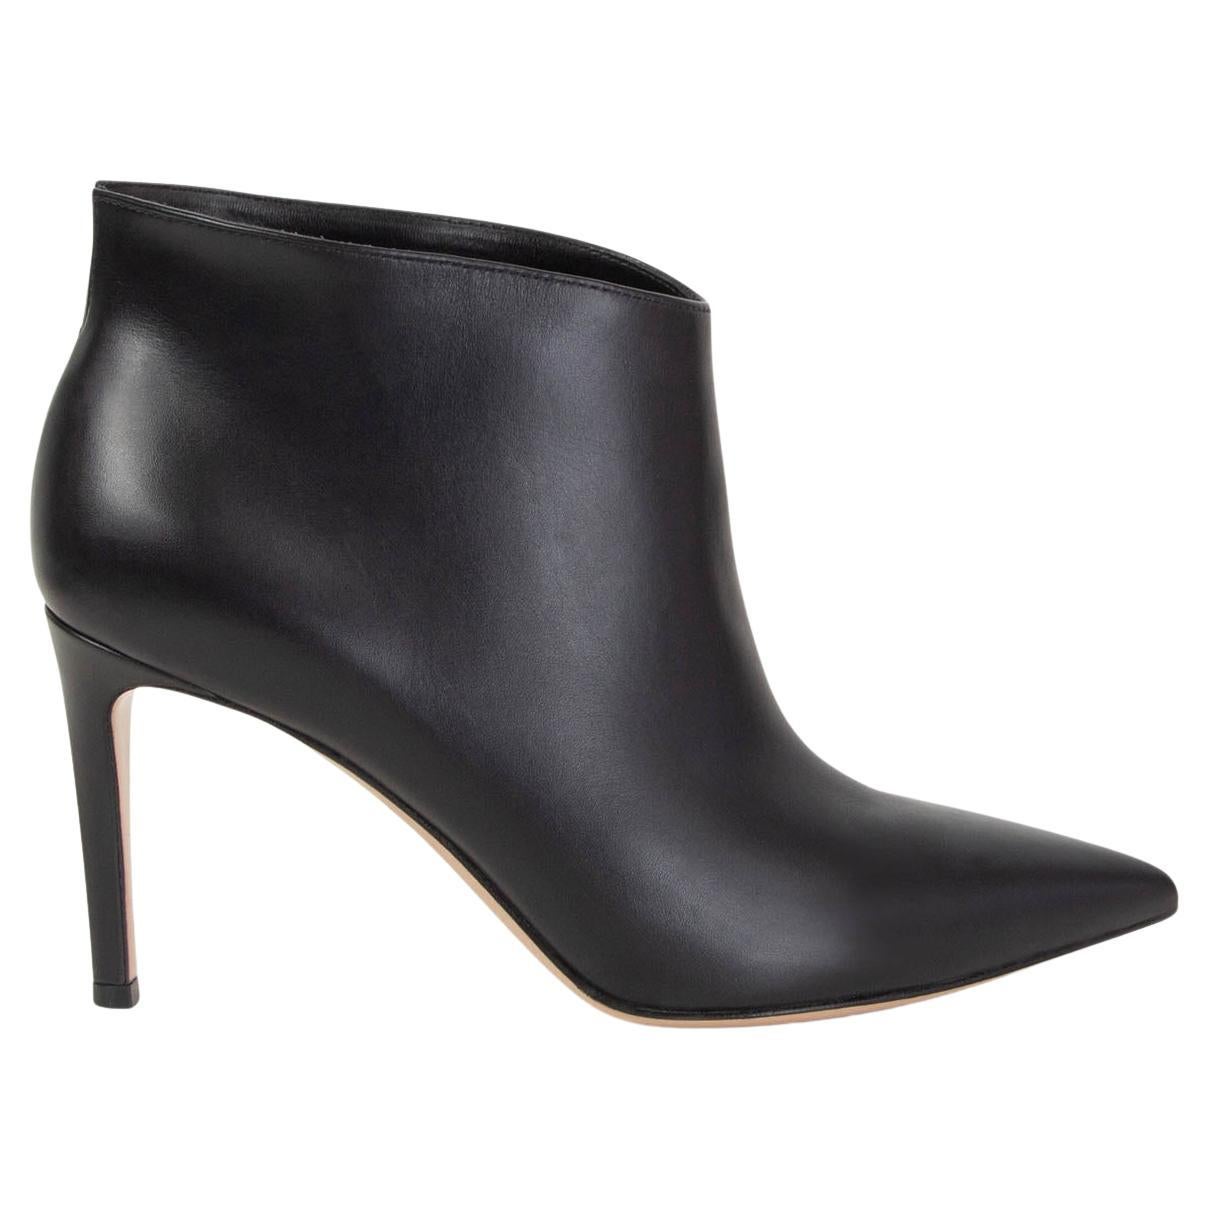 GIANVITO ROSSI black leather KAT Pointed-Toe ANKLE Boots Shoes 36.5 For Sale